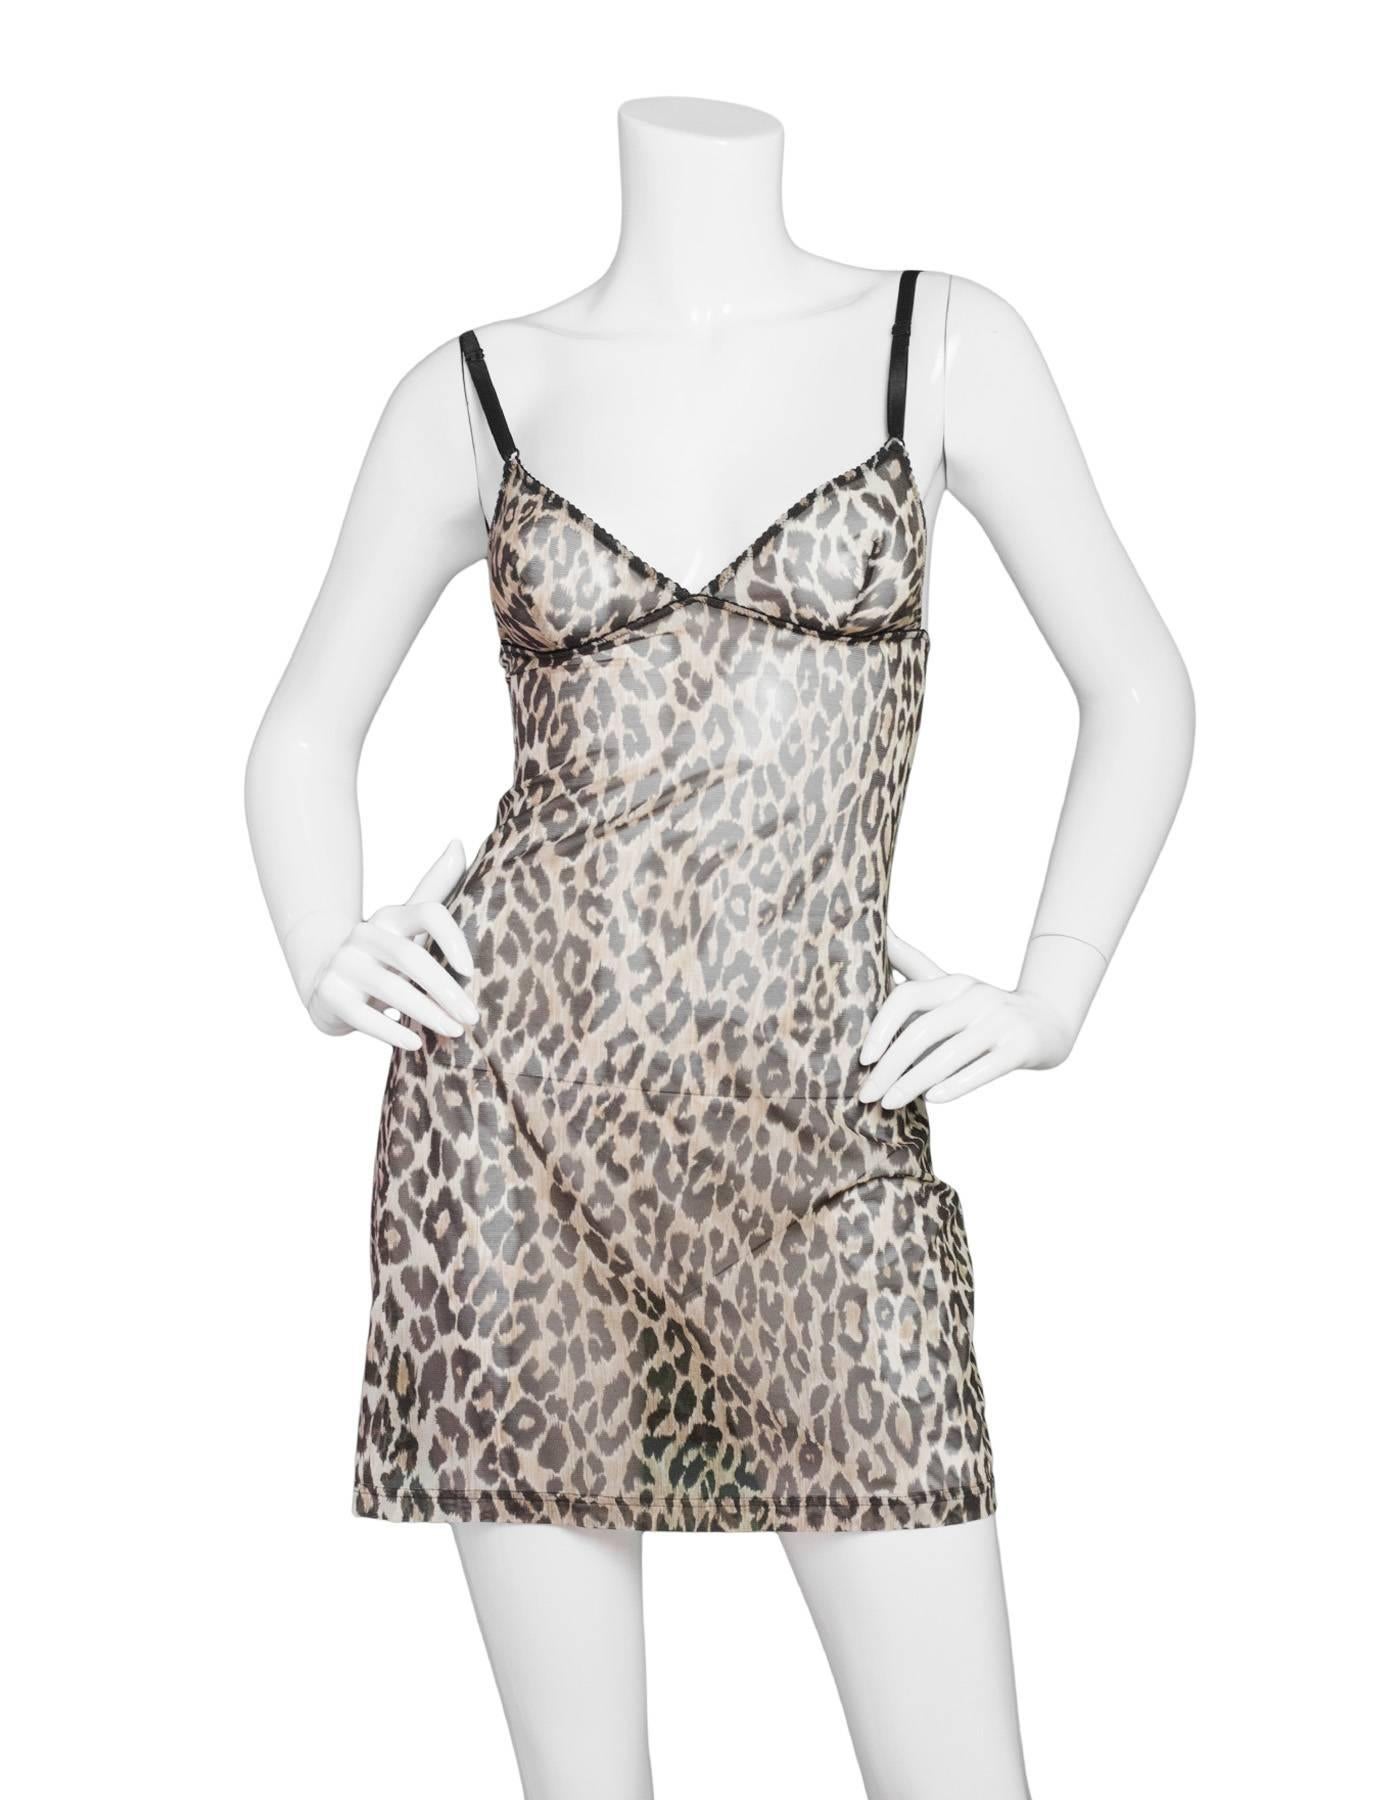 Dolce & Gabbana Sheer Leopard Print Dress Sz Small

Made In: Italy
Color: Black, brown
Composition: 80% Nylon, 20% Elastane
Lining: None
Closure/Opening: Pull over, adjustable straps
Overall Condition: Excellent pre-owned condition

Marked Size: